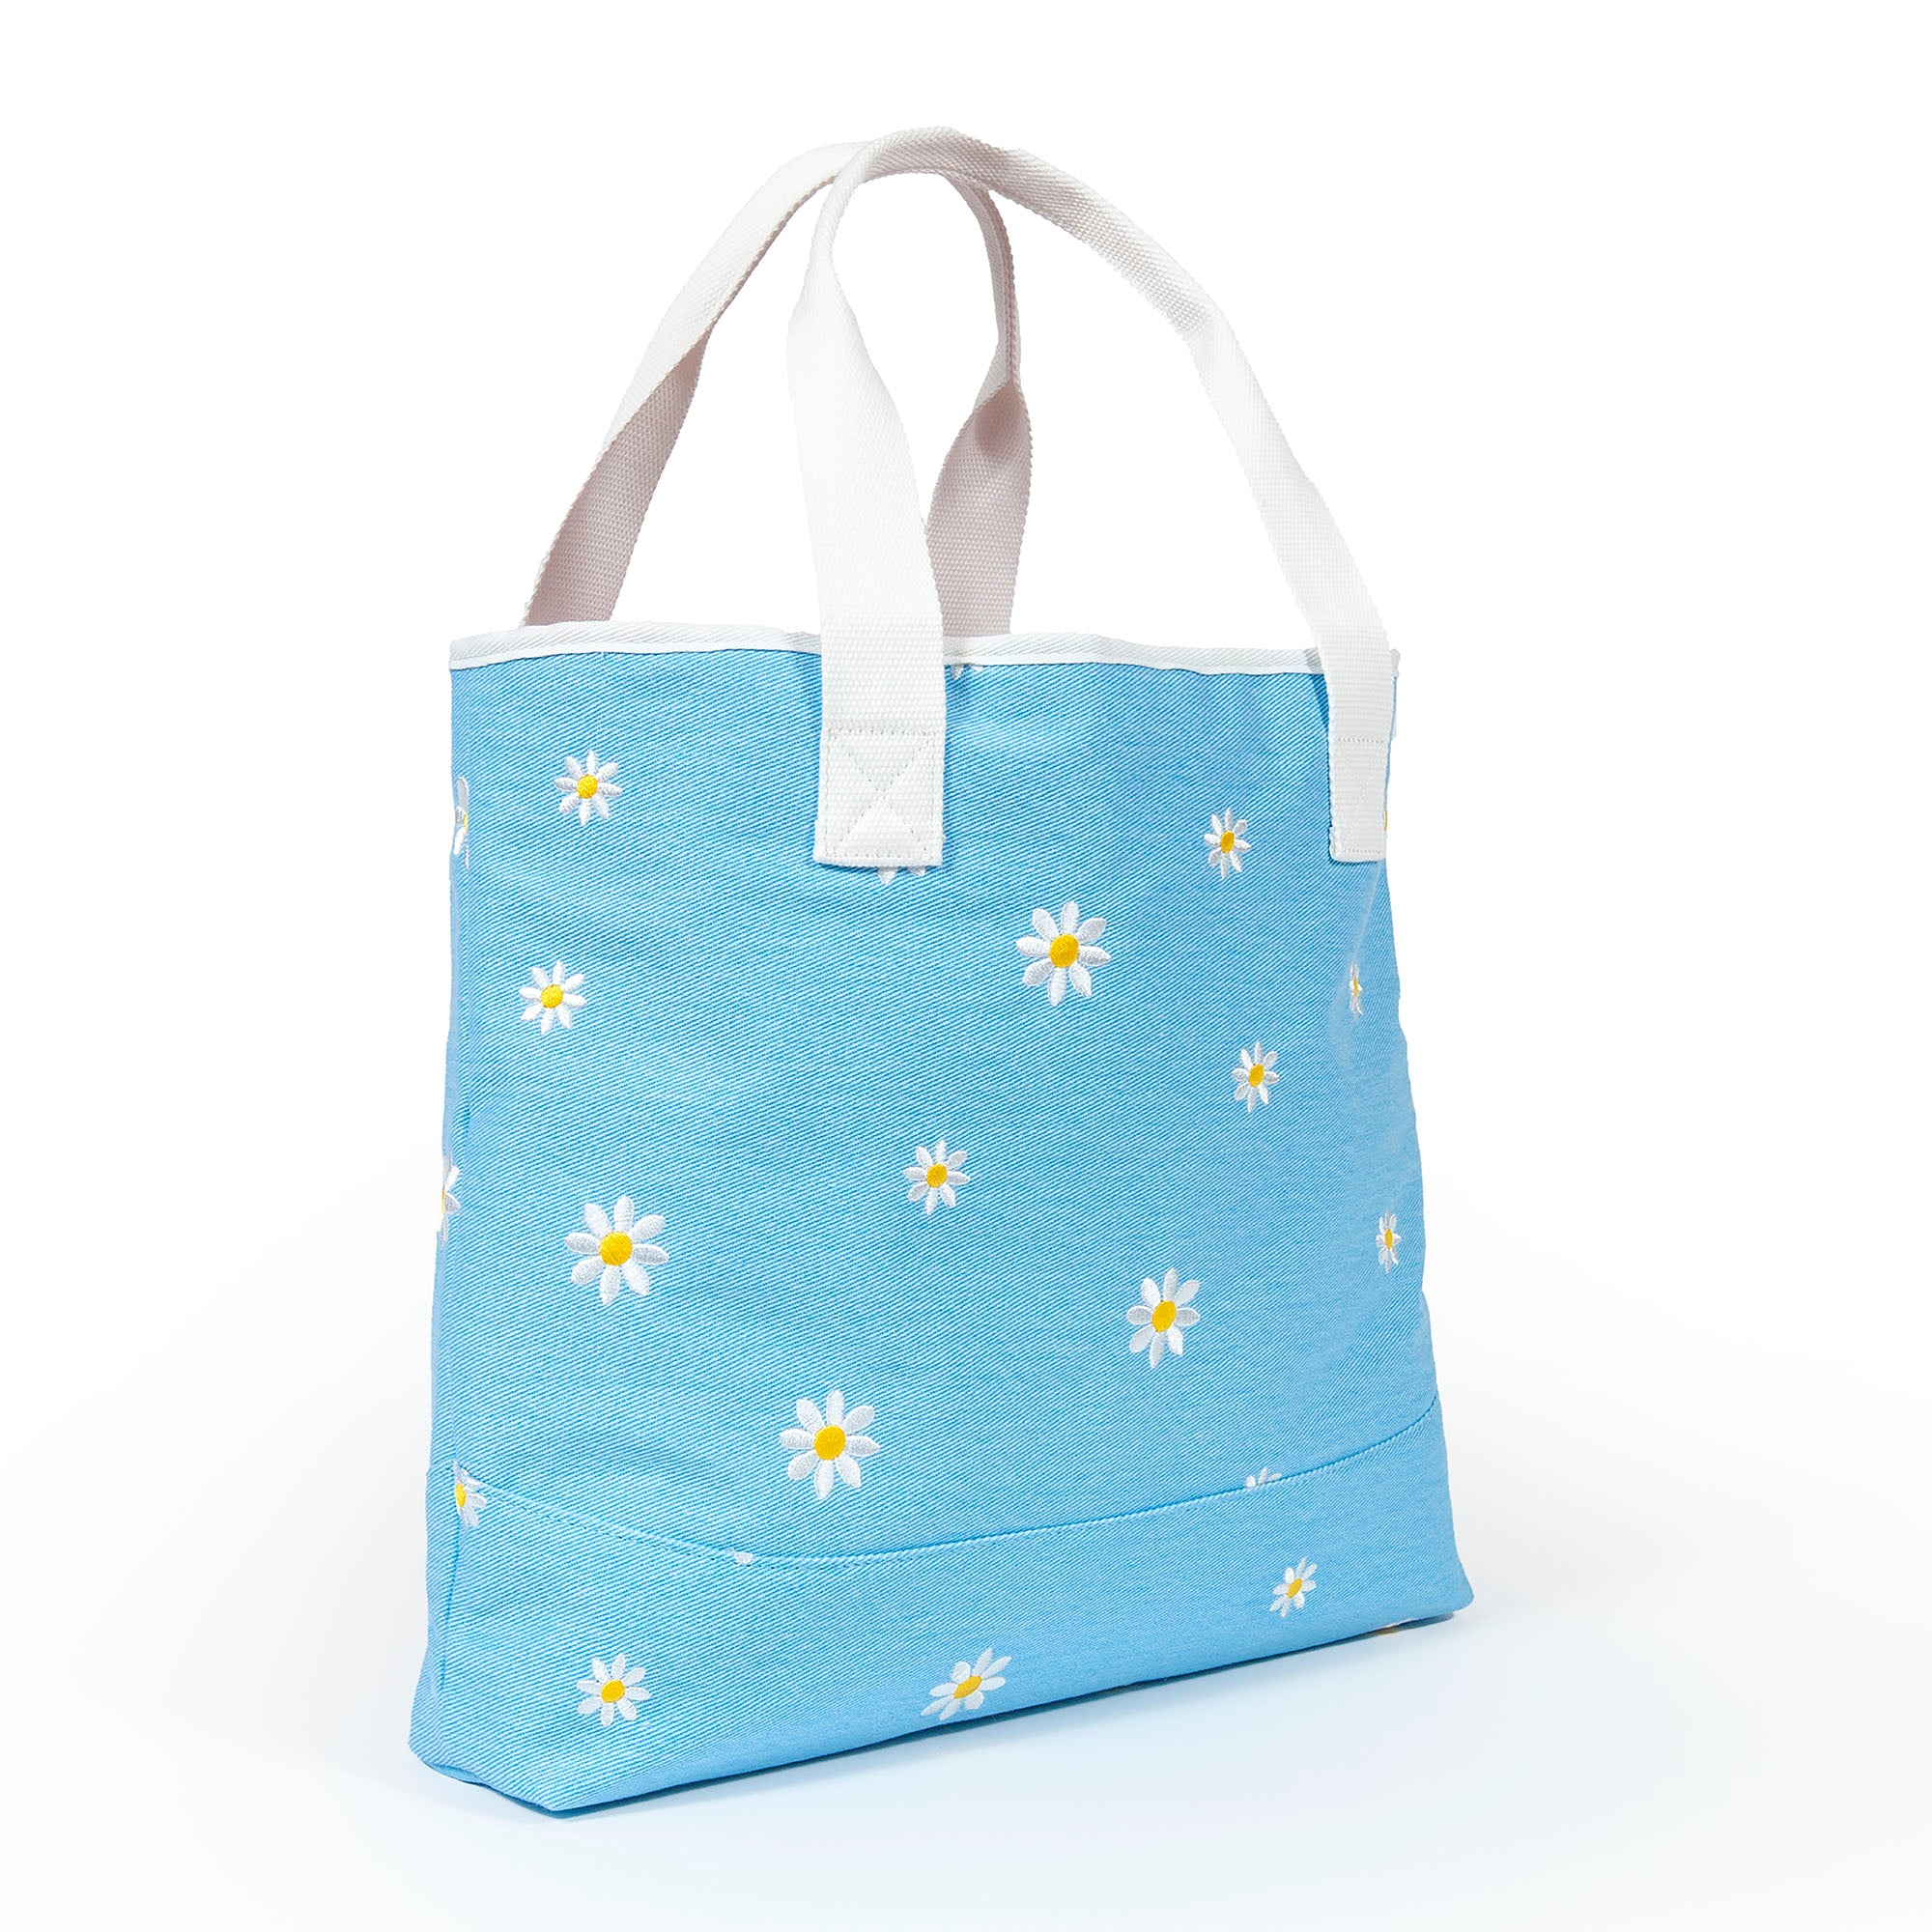 Daisy Lady Tote, Tote Bag, Bag, Canvas Carryall Bag, Carry On, Gym Bag, Pool Bag, Beach Bag, Over Night Bag, Everyday Bag, Daisy, 100% Cotton, Pattern, Beach Days, Everyday Use